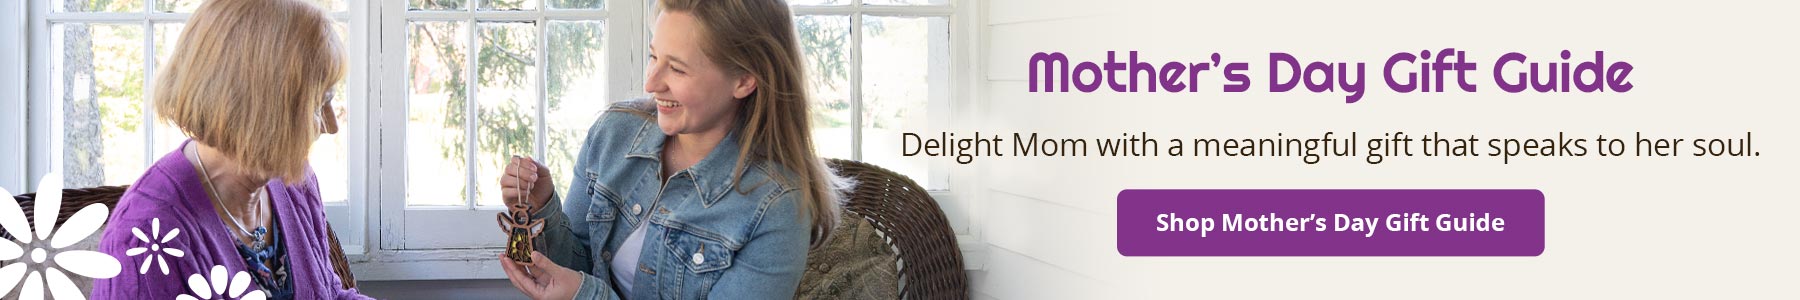 Mother's Day Gift Guide. Dlight Mom with a meaningful gift that speaks to her soul. Shop Mother's Day Gift Guide.